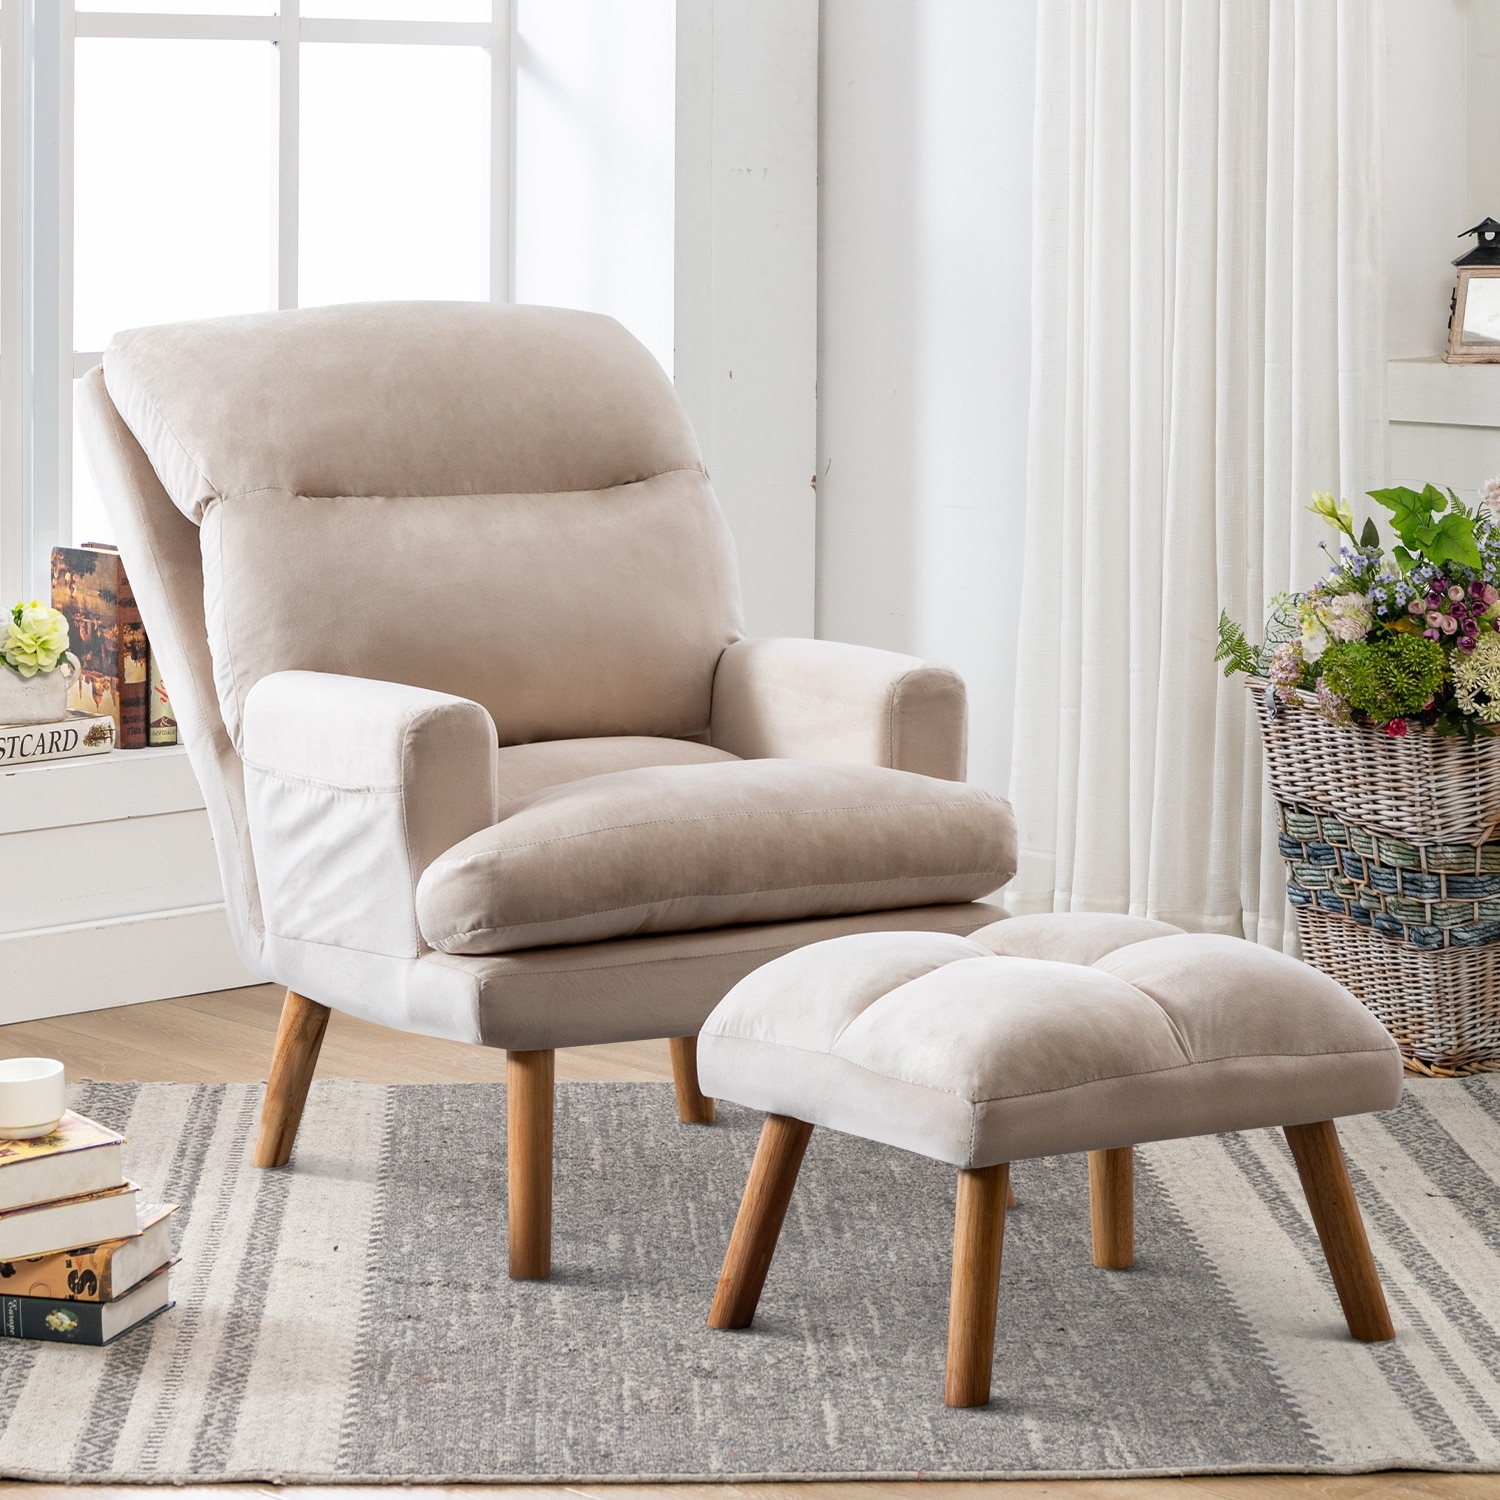 https://ak1.ostkcdn.com/images/products/is/images/direct/02c1500be84241ebe77e562c70a5c9b734ae7181/Soft-Fabric-Armchair-with-Adjustable-Backrest-and-Side-Pockets%2Cwith-Ottoman.jpg